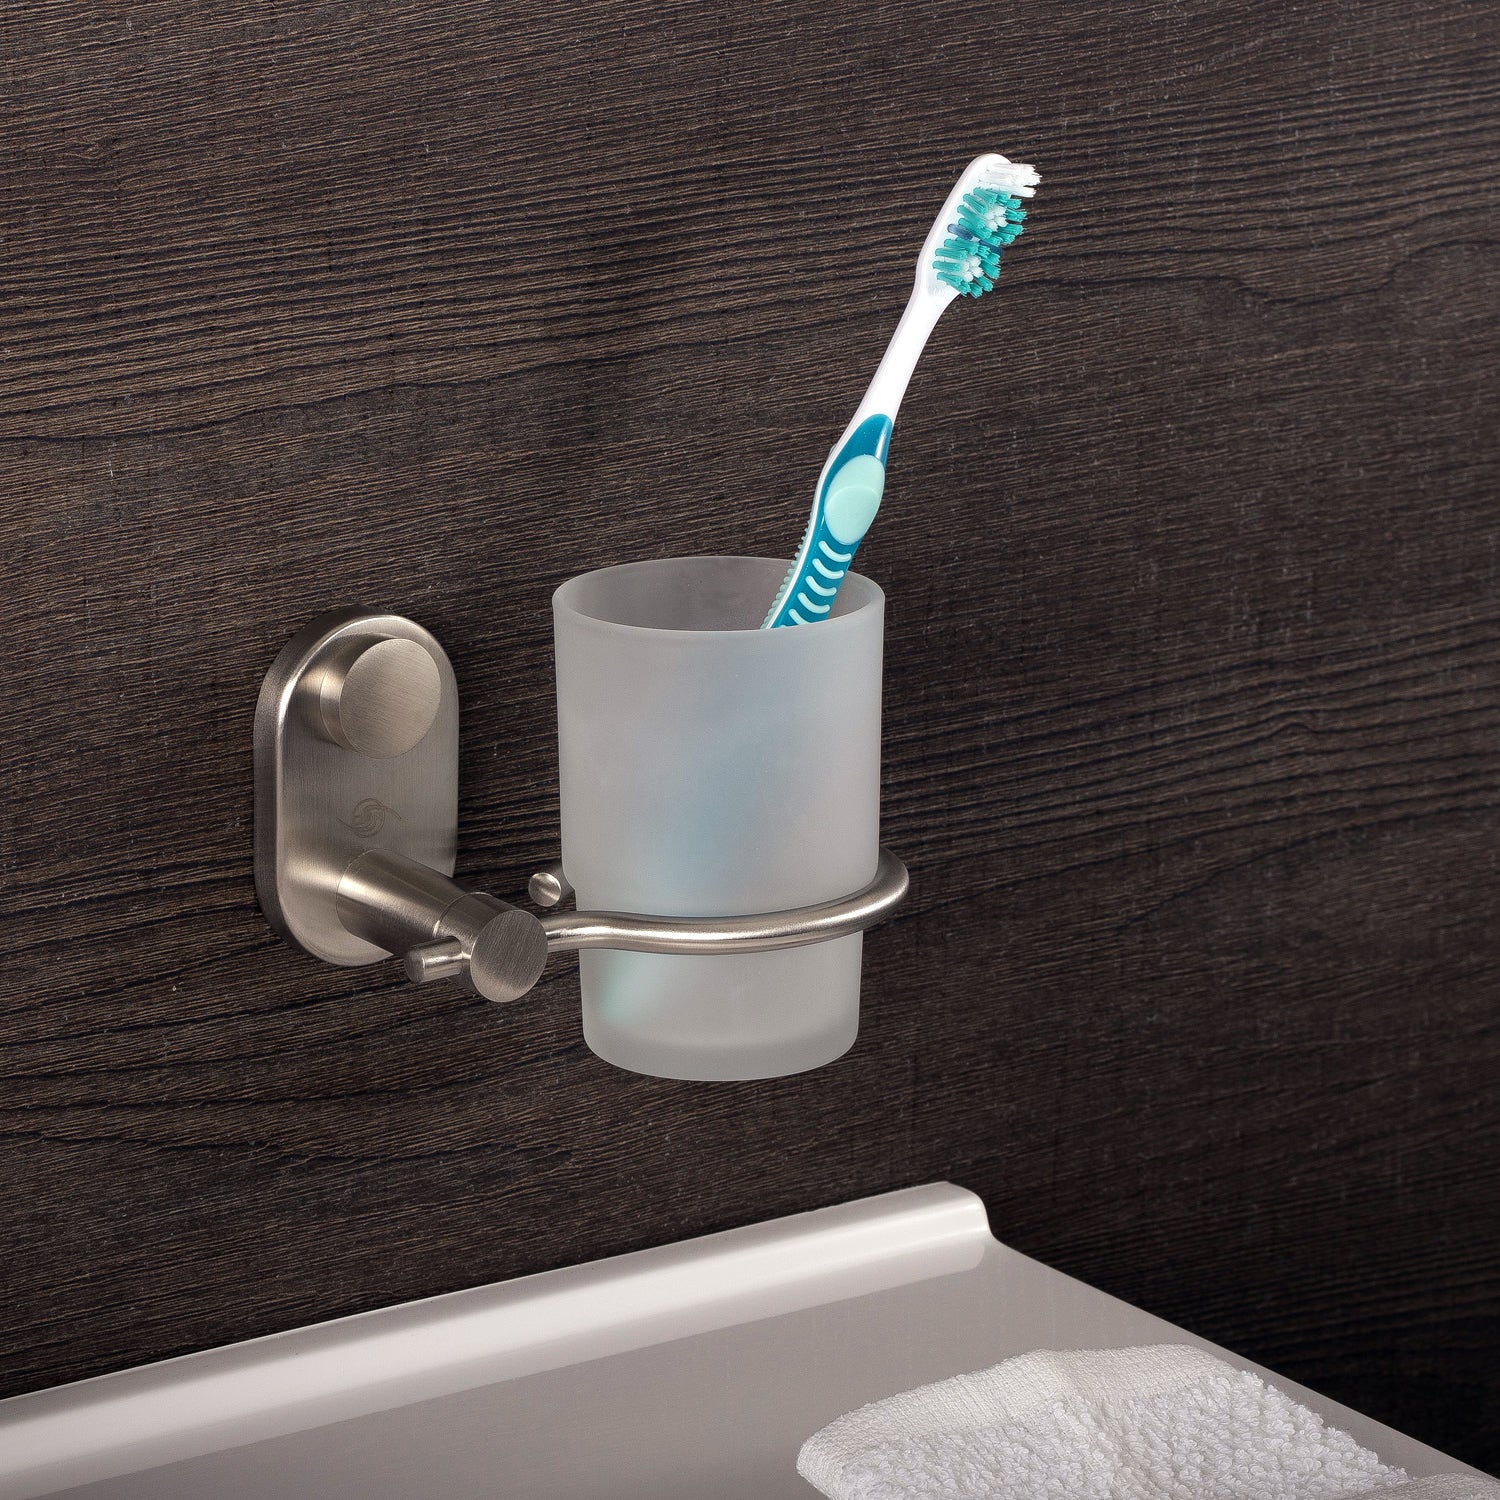 DAX Bathroom Single Tumbler Toothbrush Holder, Wall Mount Stainless St